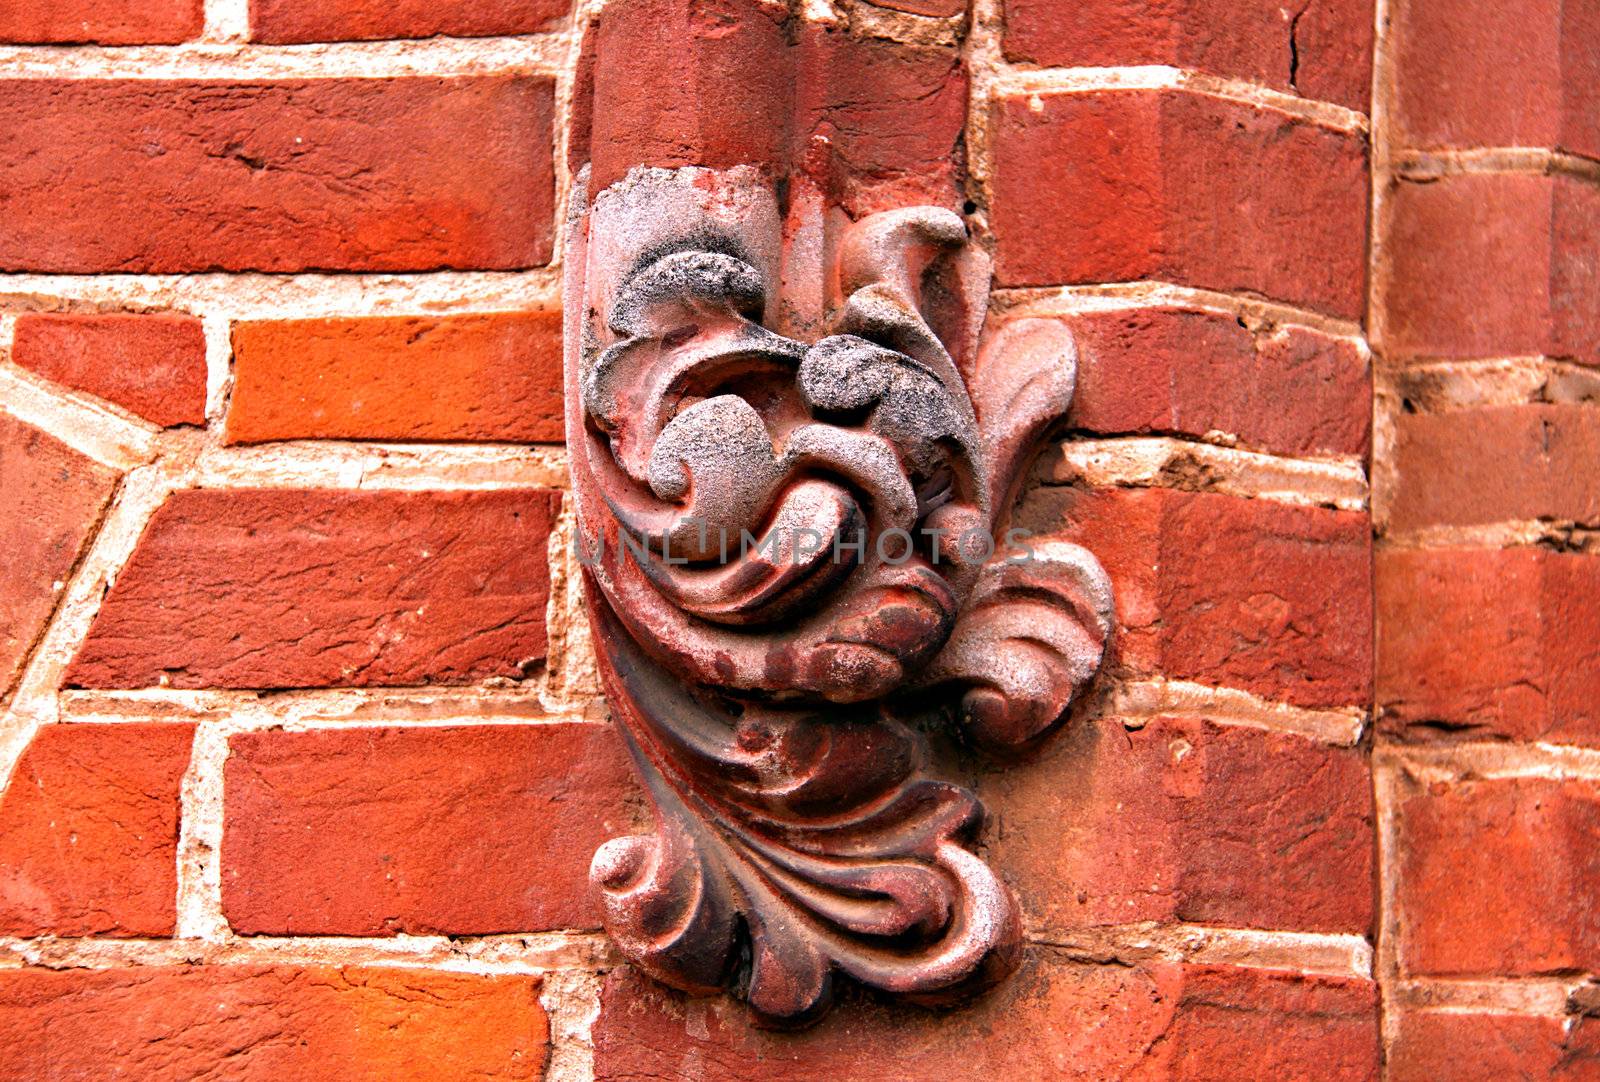 Ornate Decorations on Exterior Red Brick Wall by Cloudia